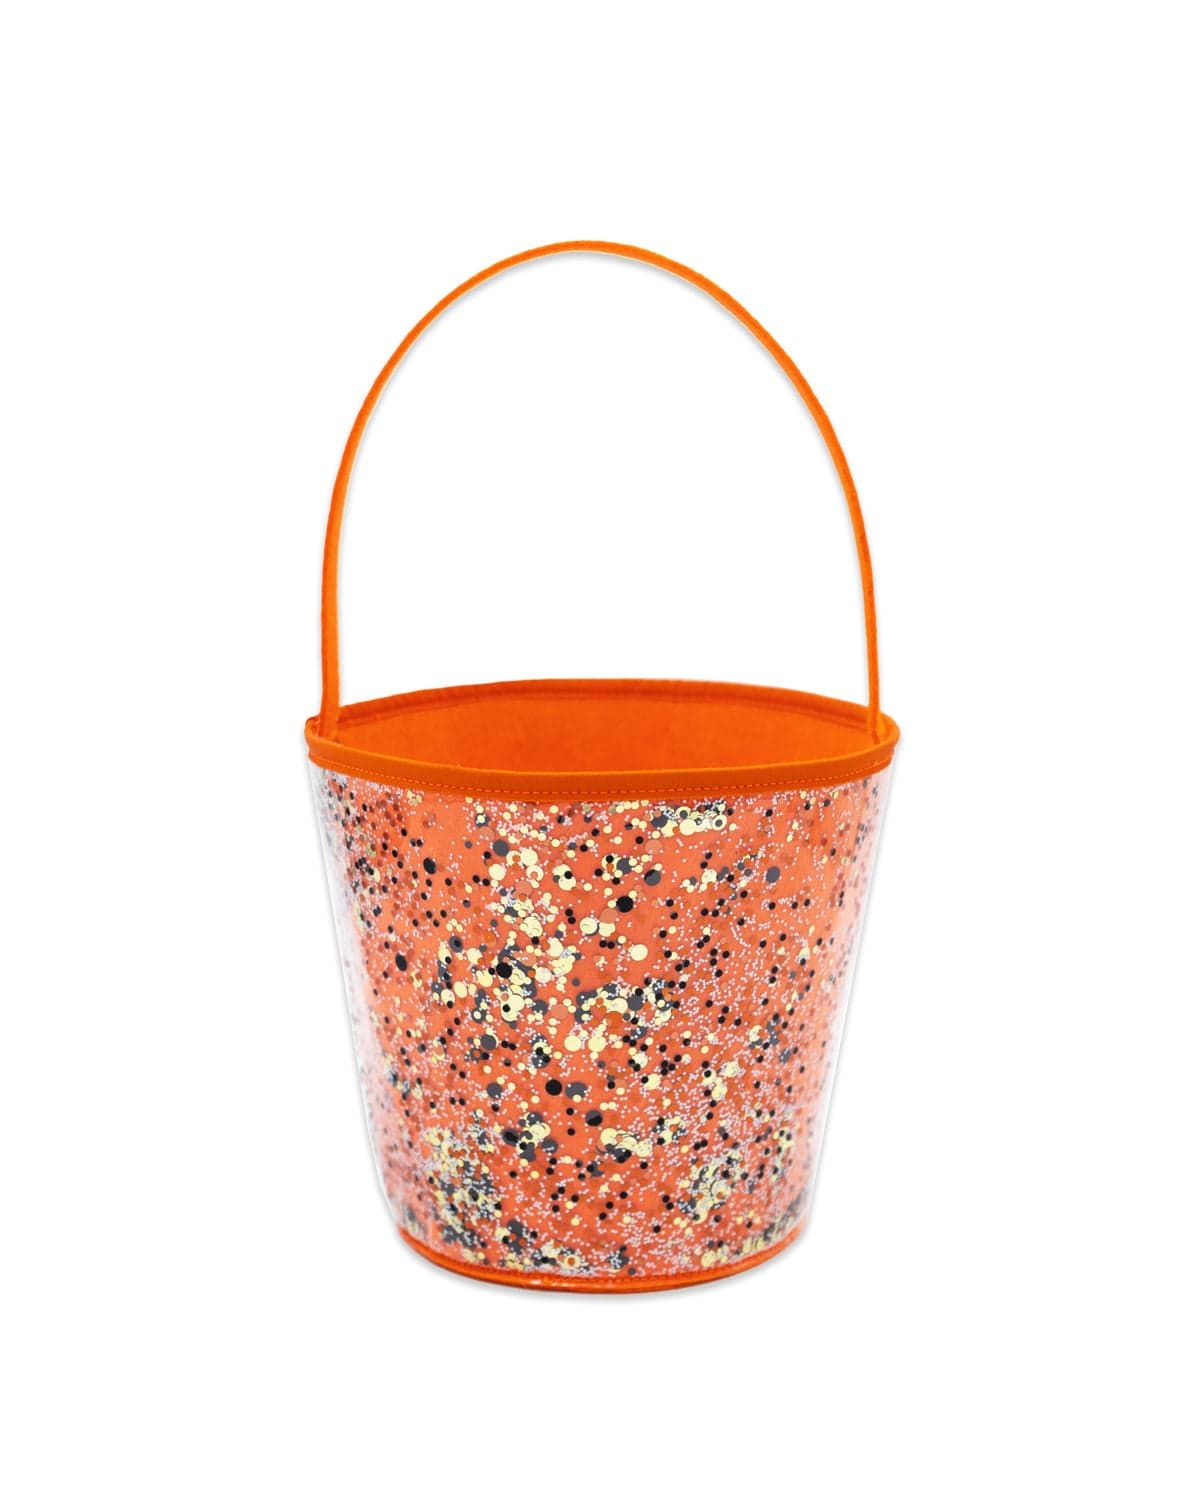 confetti trick-or-treat candy bucket | Packed Party